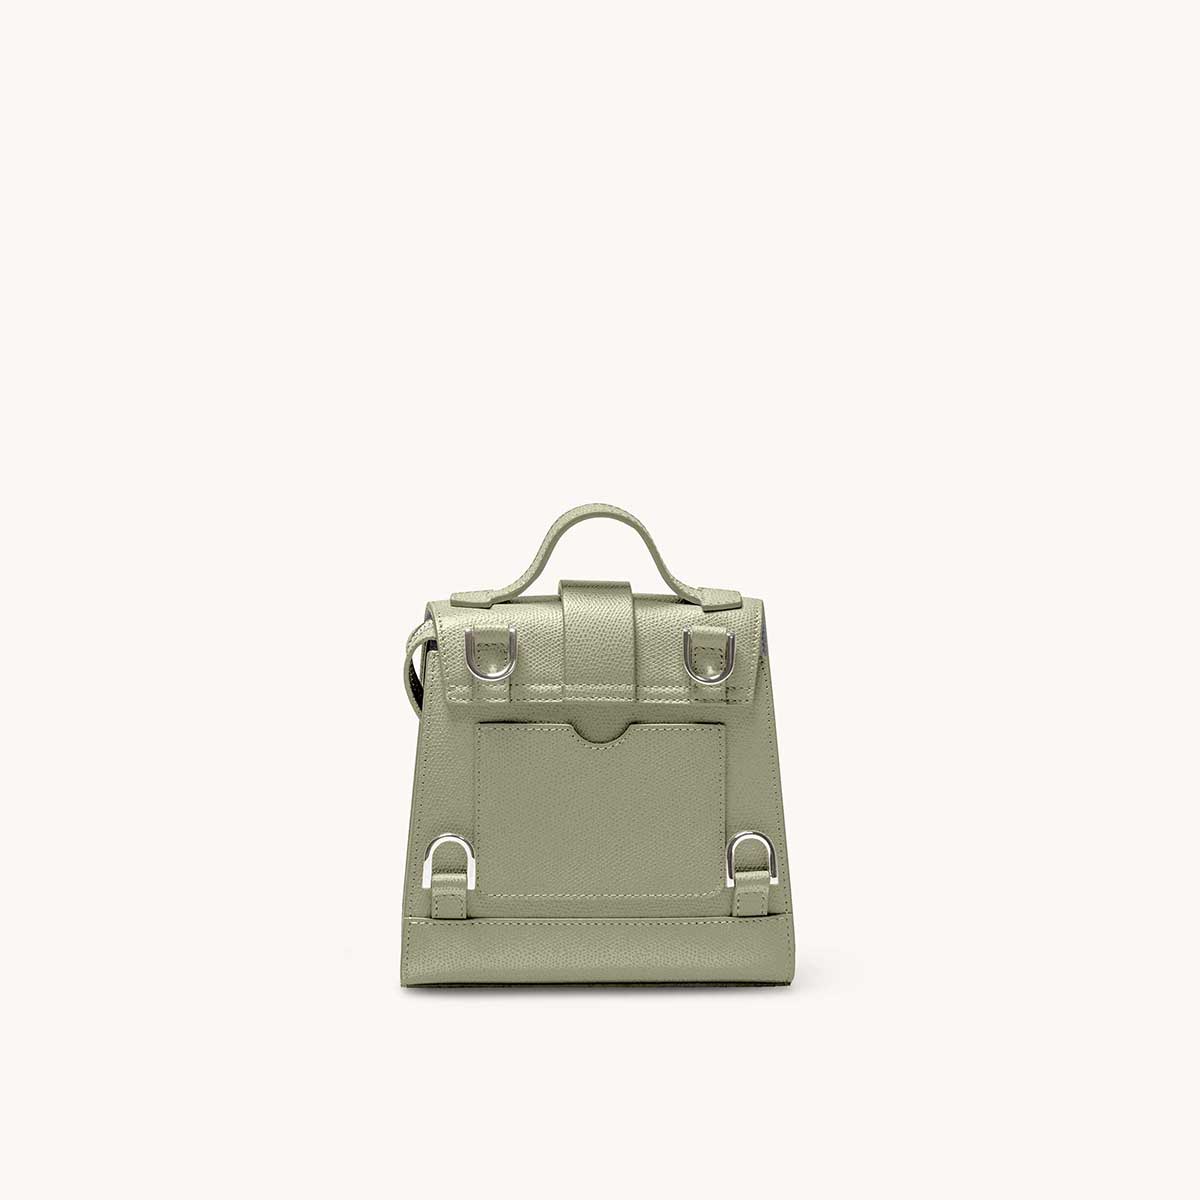 Mini Alunna Bag Pebbled Sage with Silver Hardware Back View Without Straps